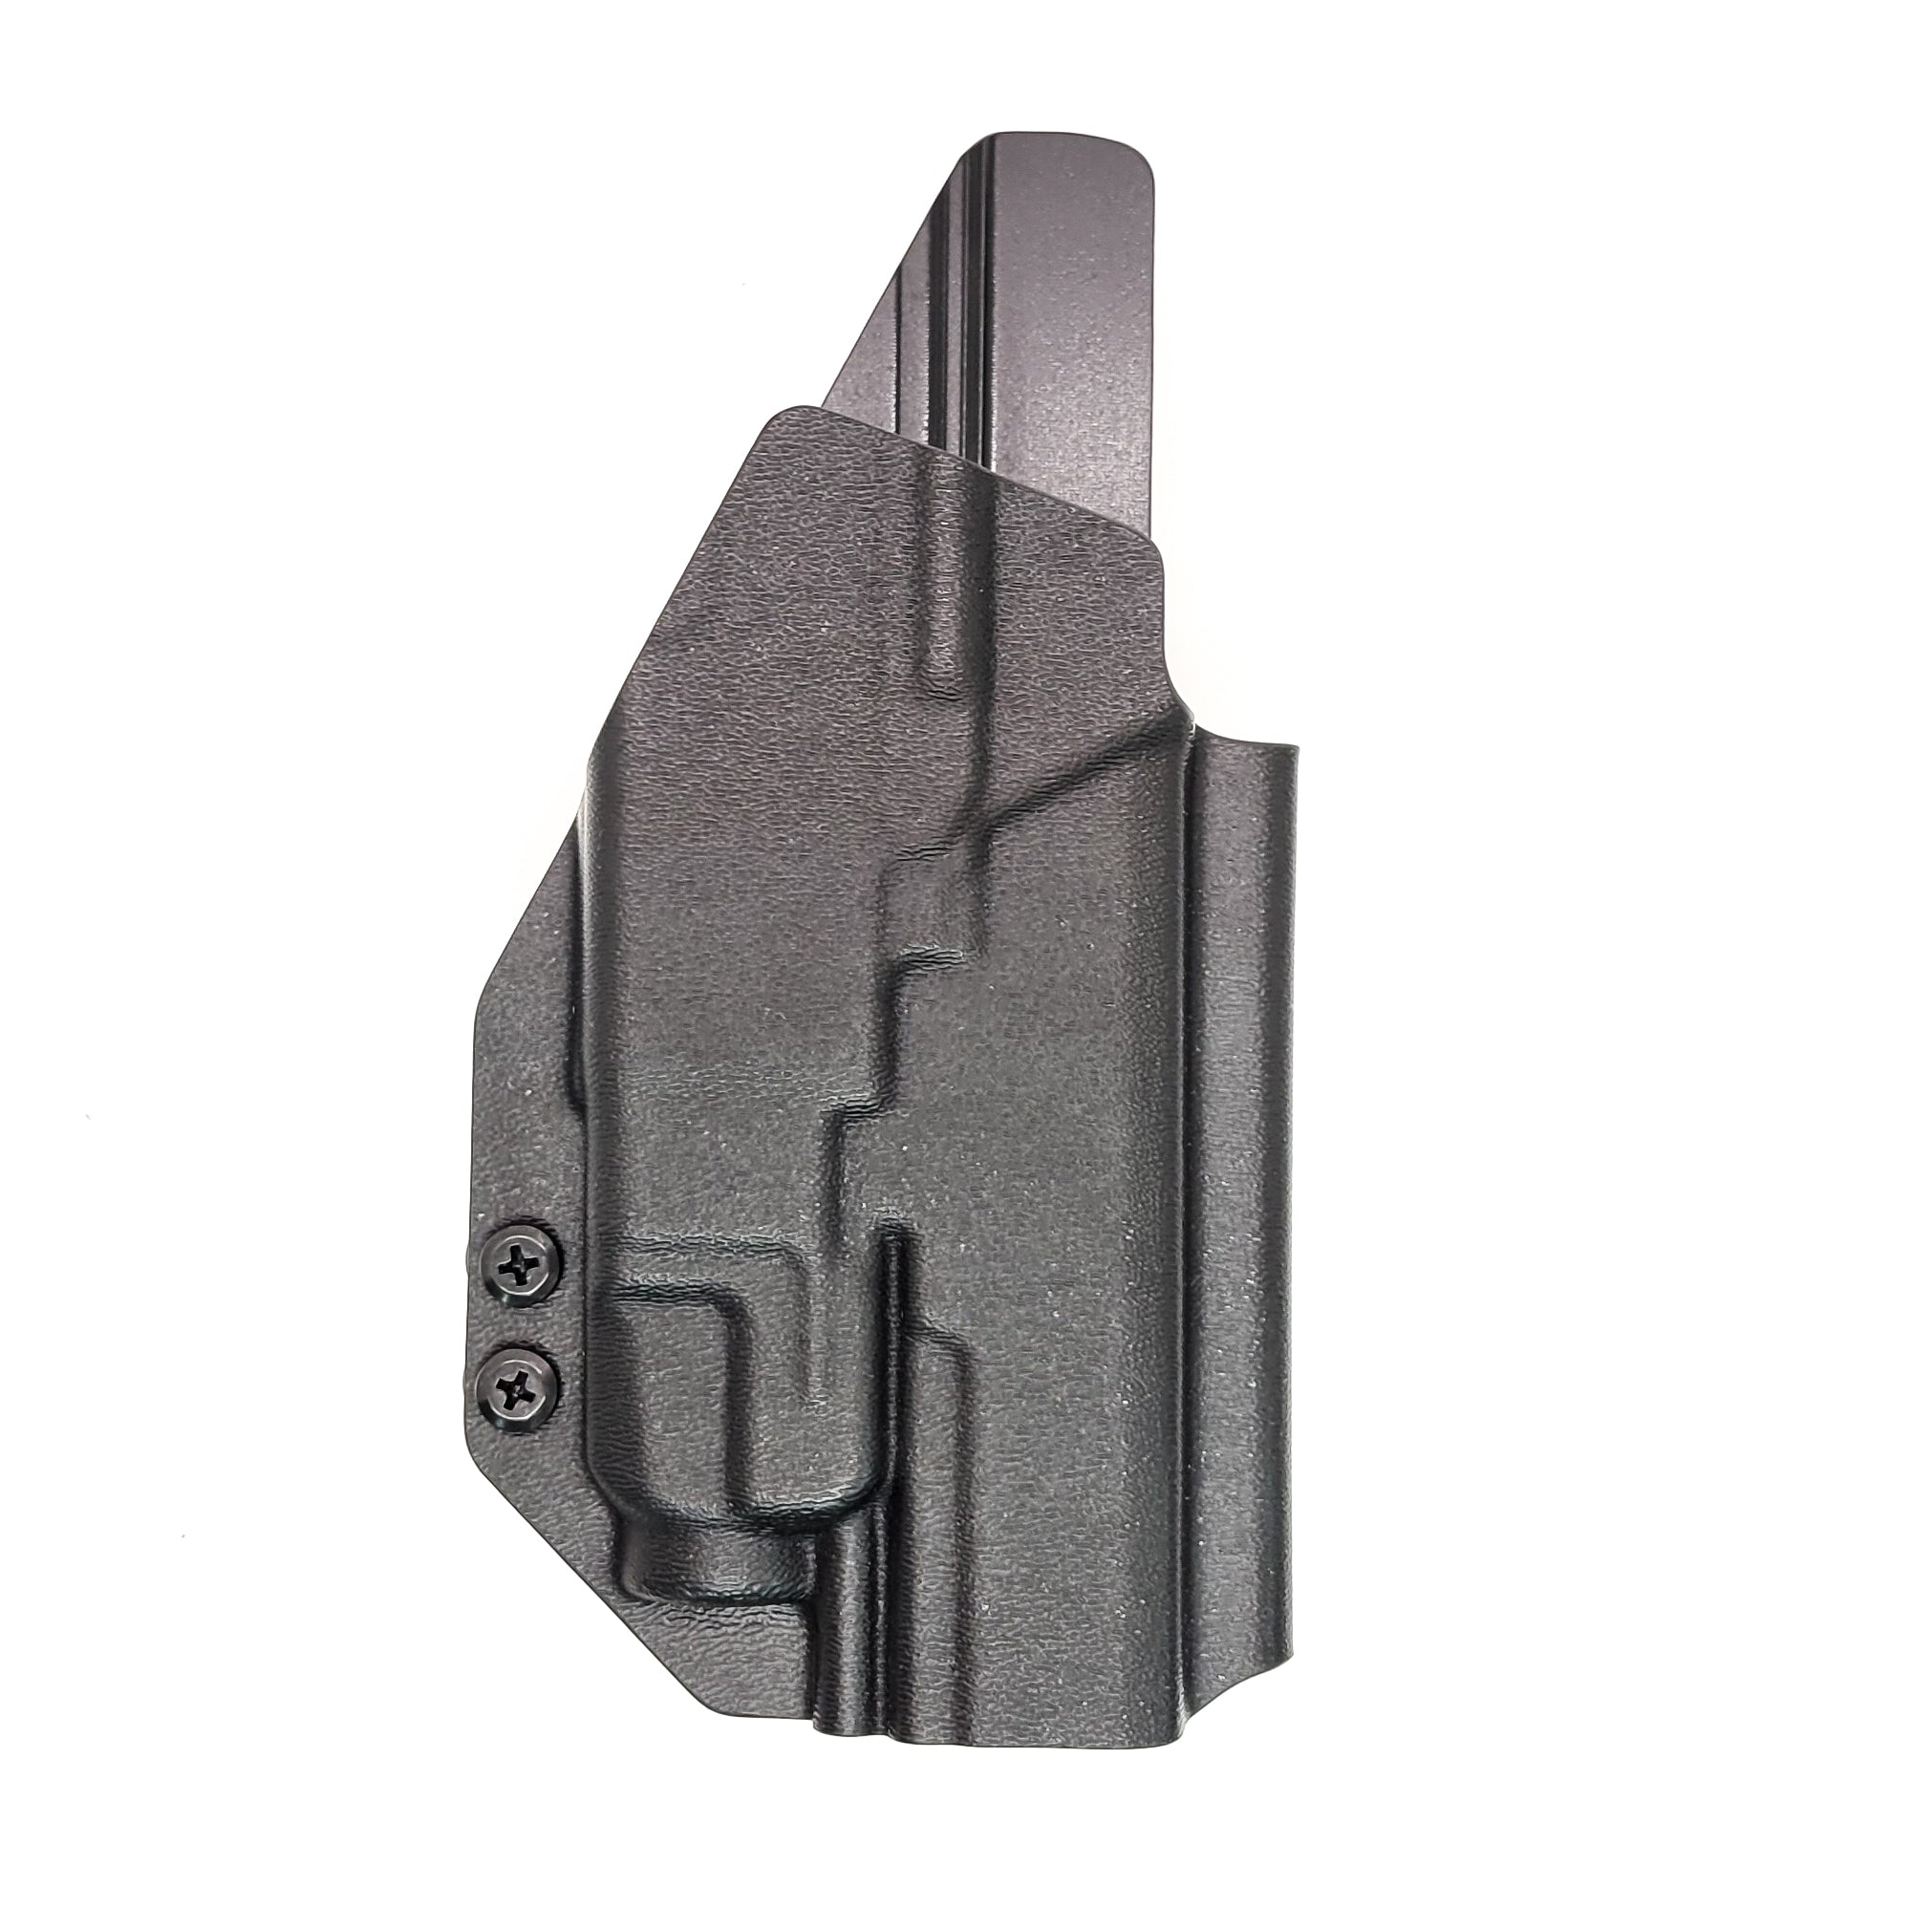 For the best Outside Waistband Taco Style Holster designed to fit the Walther PDP Pro SD Compact 4" pistol with the Streamlight TLR-7A or TLR-7 mounted on the firearm, shop Four Brothers Holsters. Cut for red dot sight, full sweat guard, adjustable retention & open muzzle for threaded barrels & compensators. 